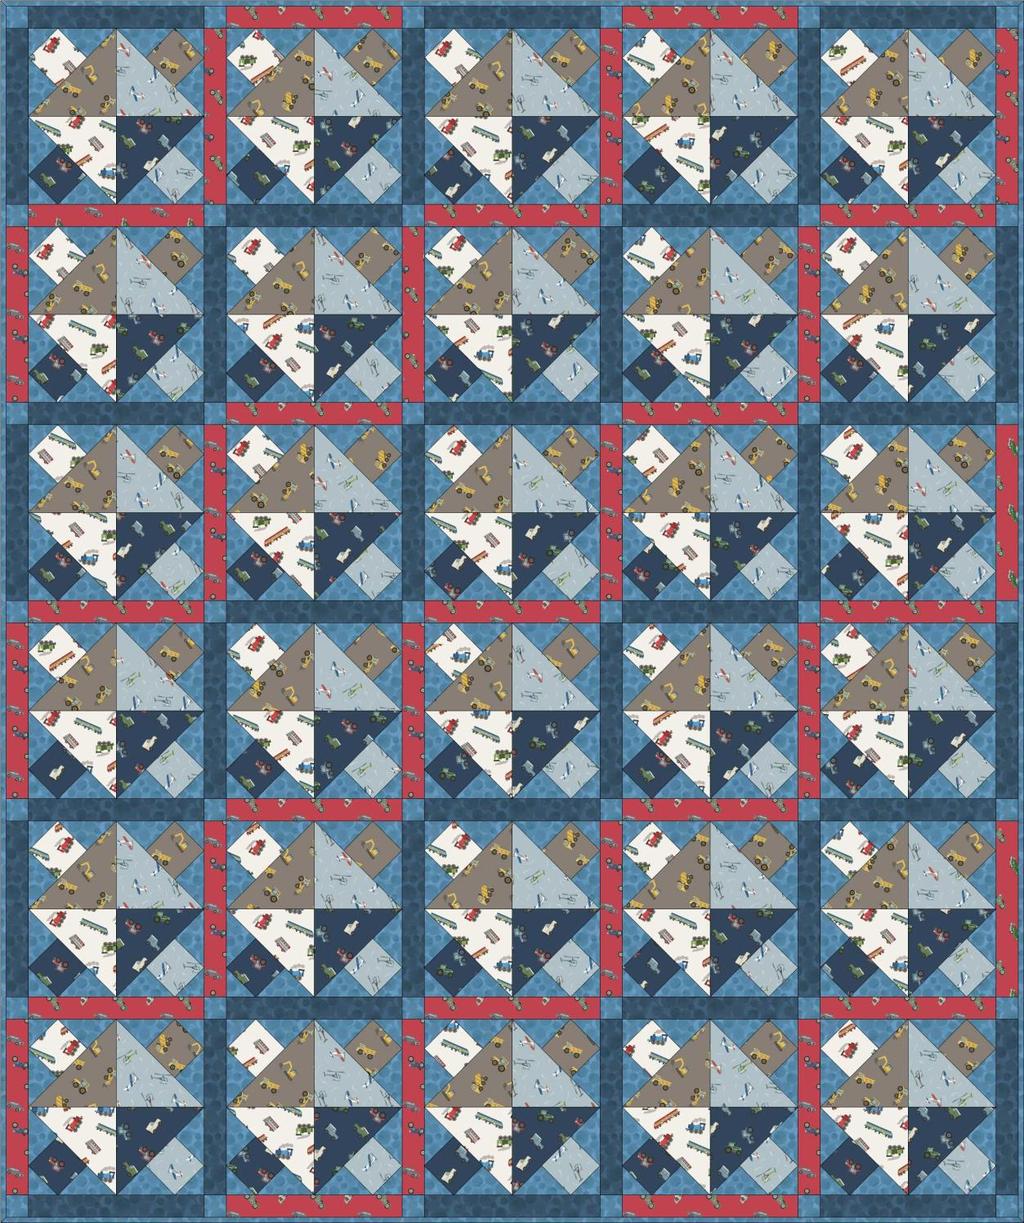 Small Things on the Move Quilt (Design 1) Designed and made by Sally Ablett Size: 46 x 55 Block: 8½ x 8½ QUILT 1 FABRIC REQUIREMENTS (Small Things on the Move Collection) Fabric 1: ½yd - ½mtr - SM11.